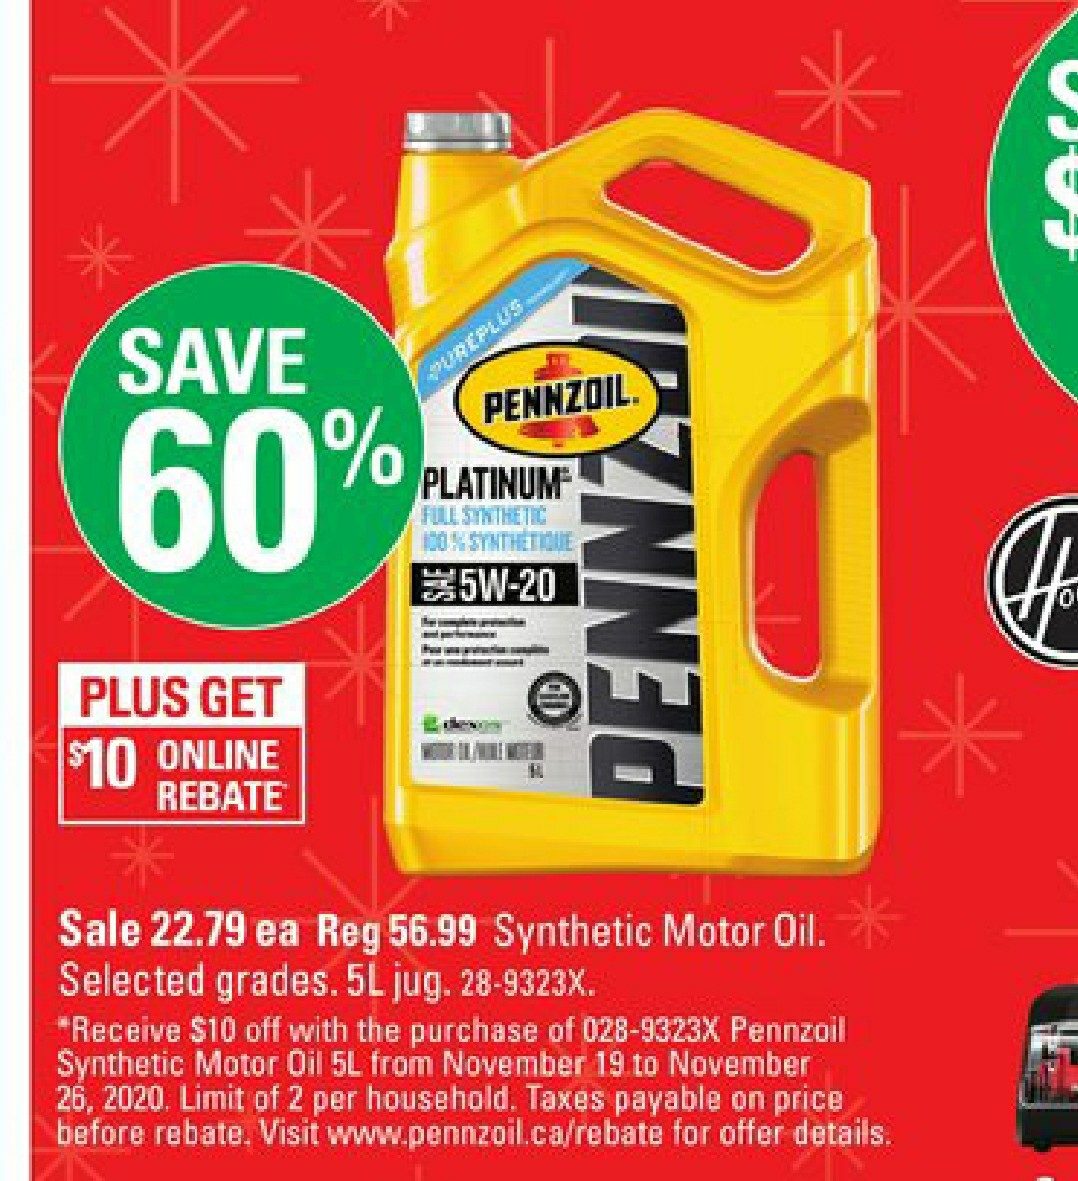 canadian-tire-expired-pennzoil-for-22-79-plus-rebate-up-to-20